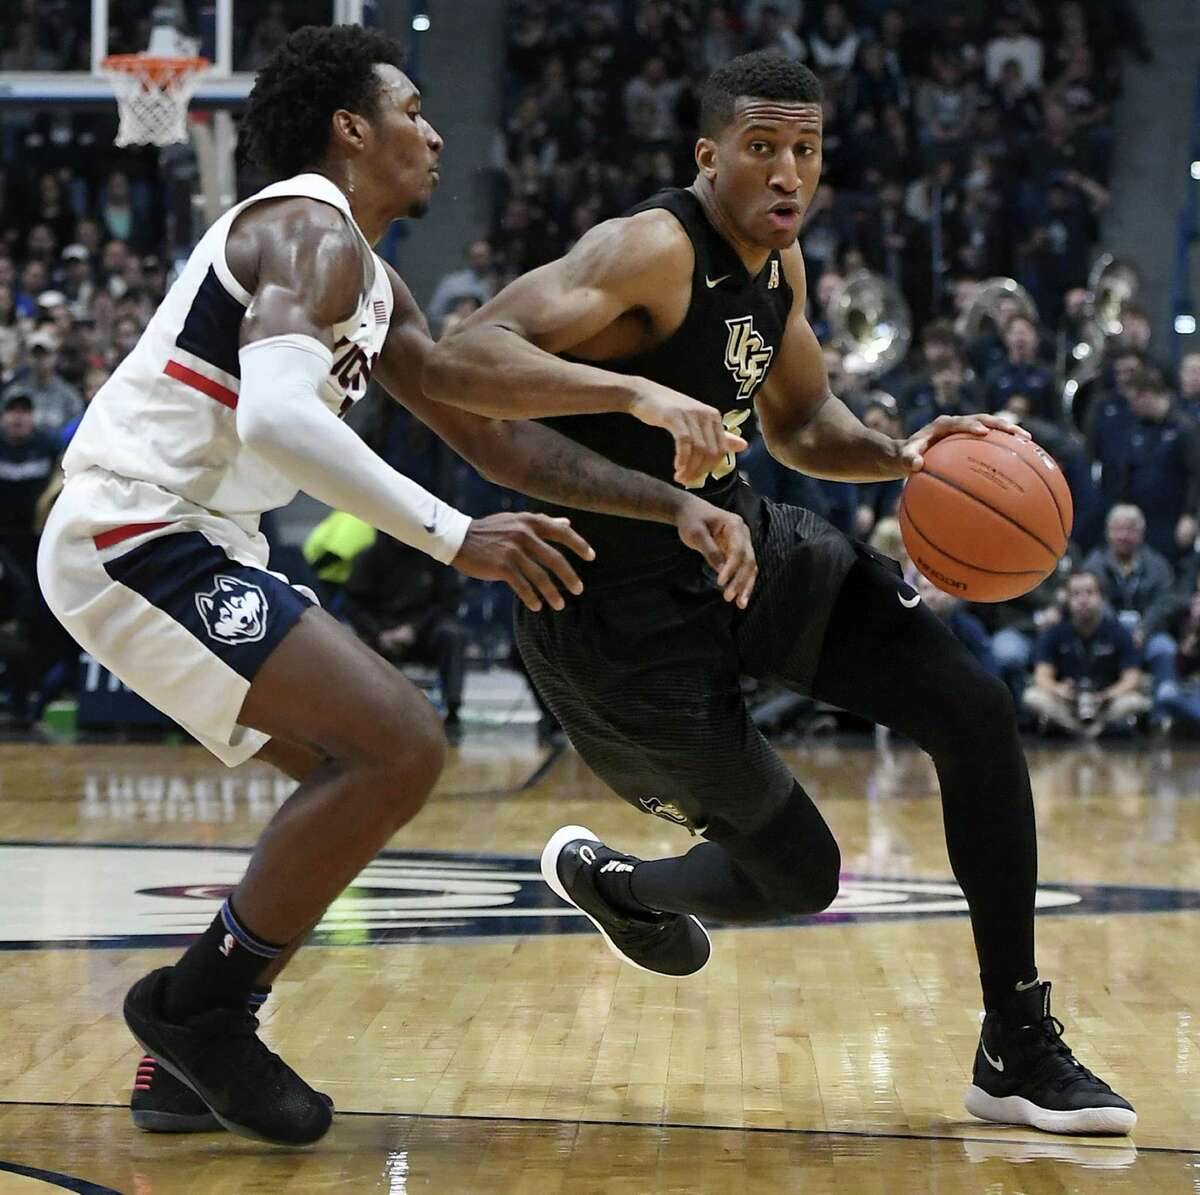 UCF’s Aubrey Dawkins dribbles as UConn’s Christian Vital defends during the first half on Saturday.